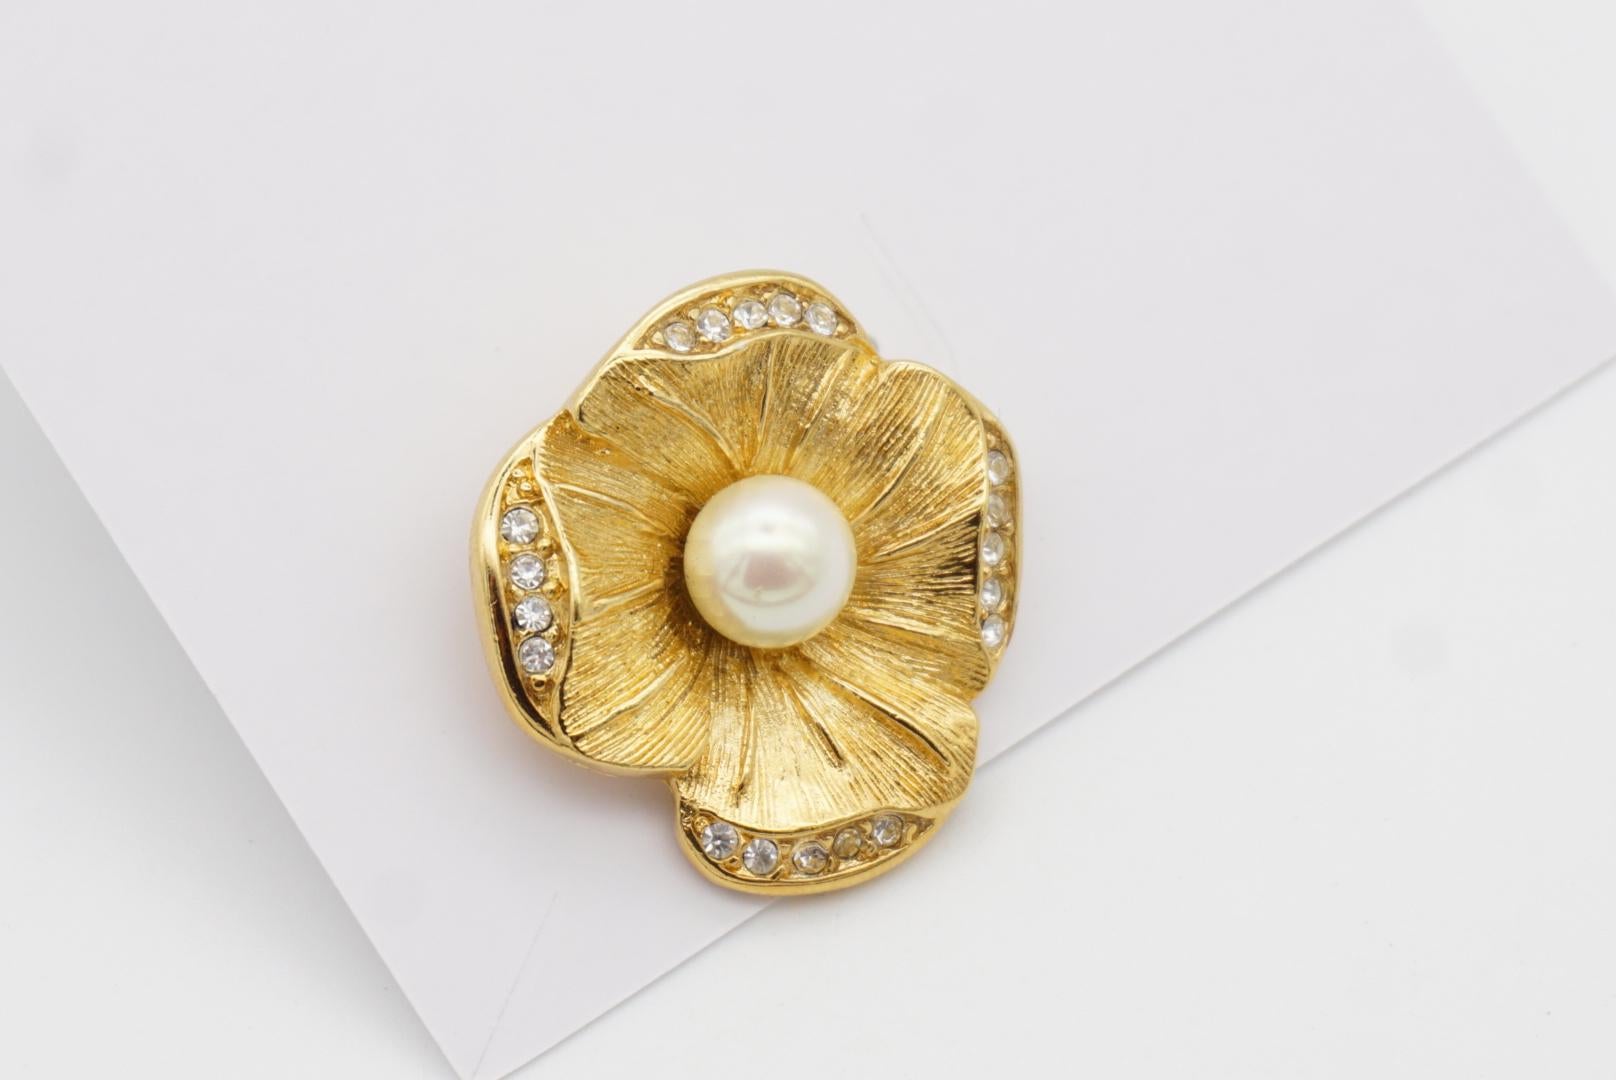 Christian Dior Vintage 1980s Flower White Pearl Crystals Retro Gold Pin Brooch  In Excellent Condition For Sale In Wokingham, England